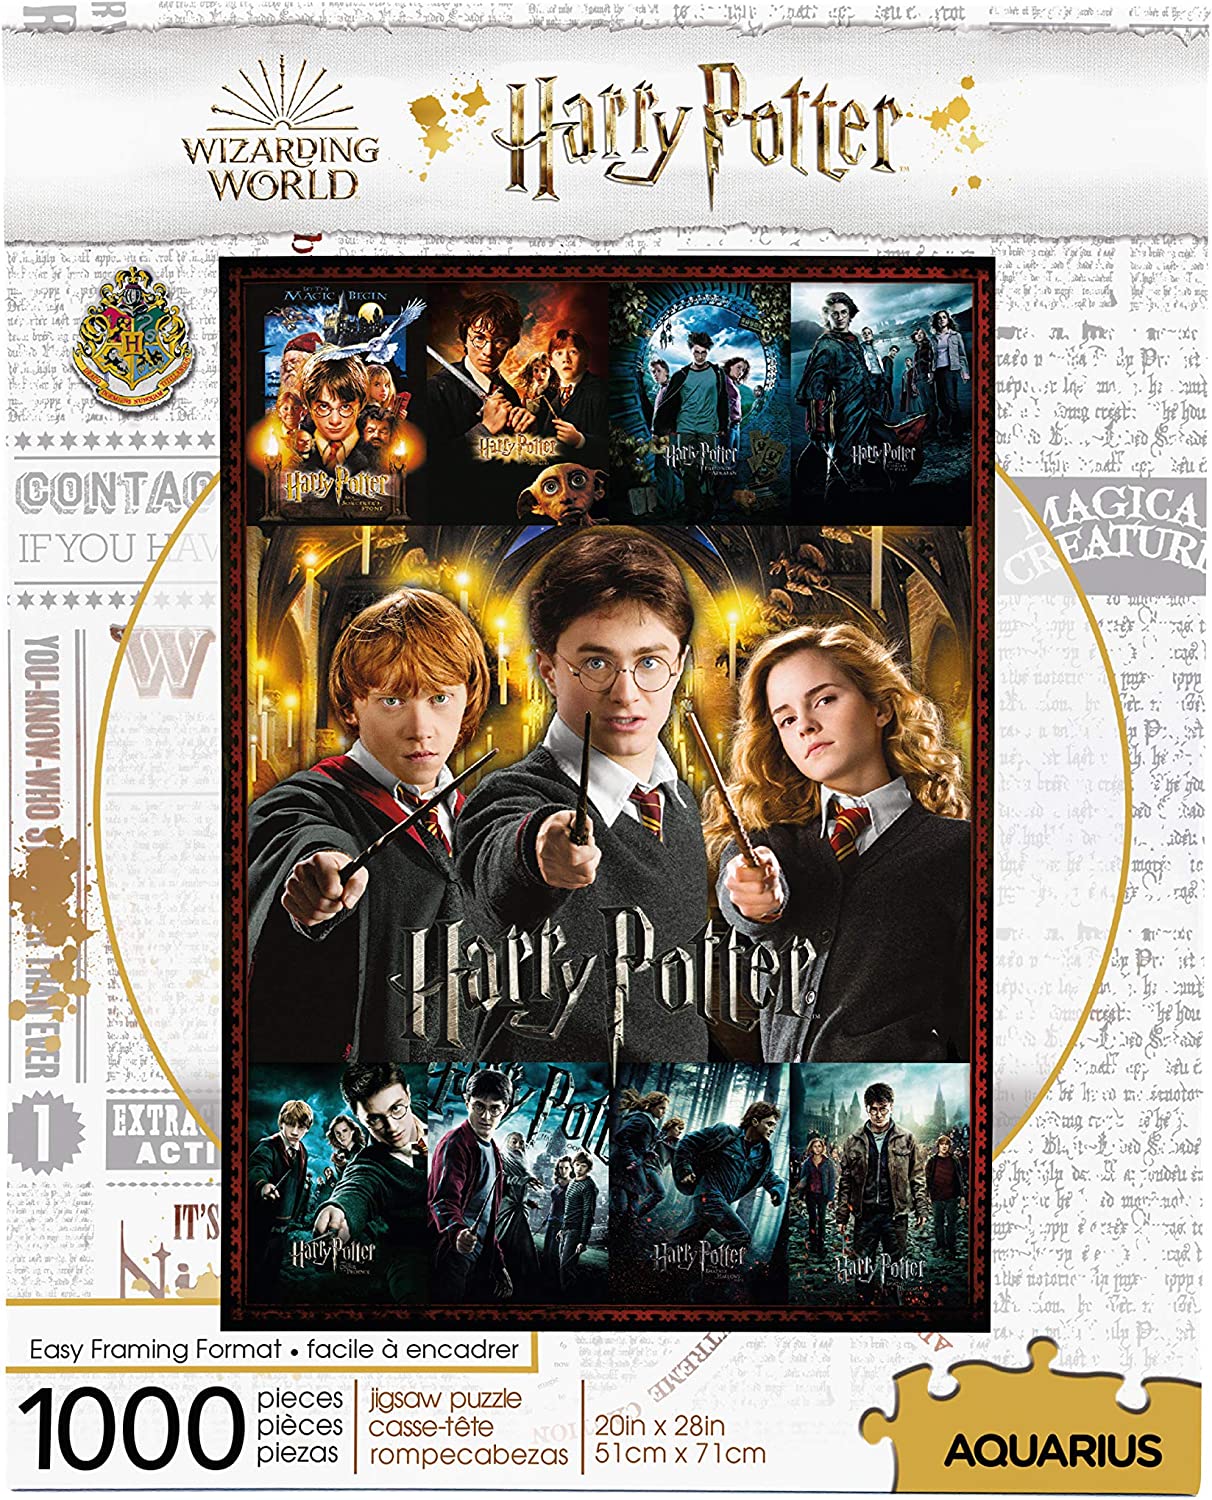 Harry Potter Posters 1000 piece jigsaw Puzzle